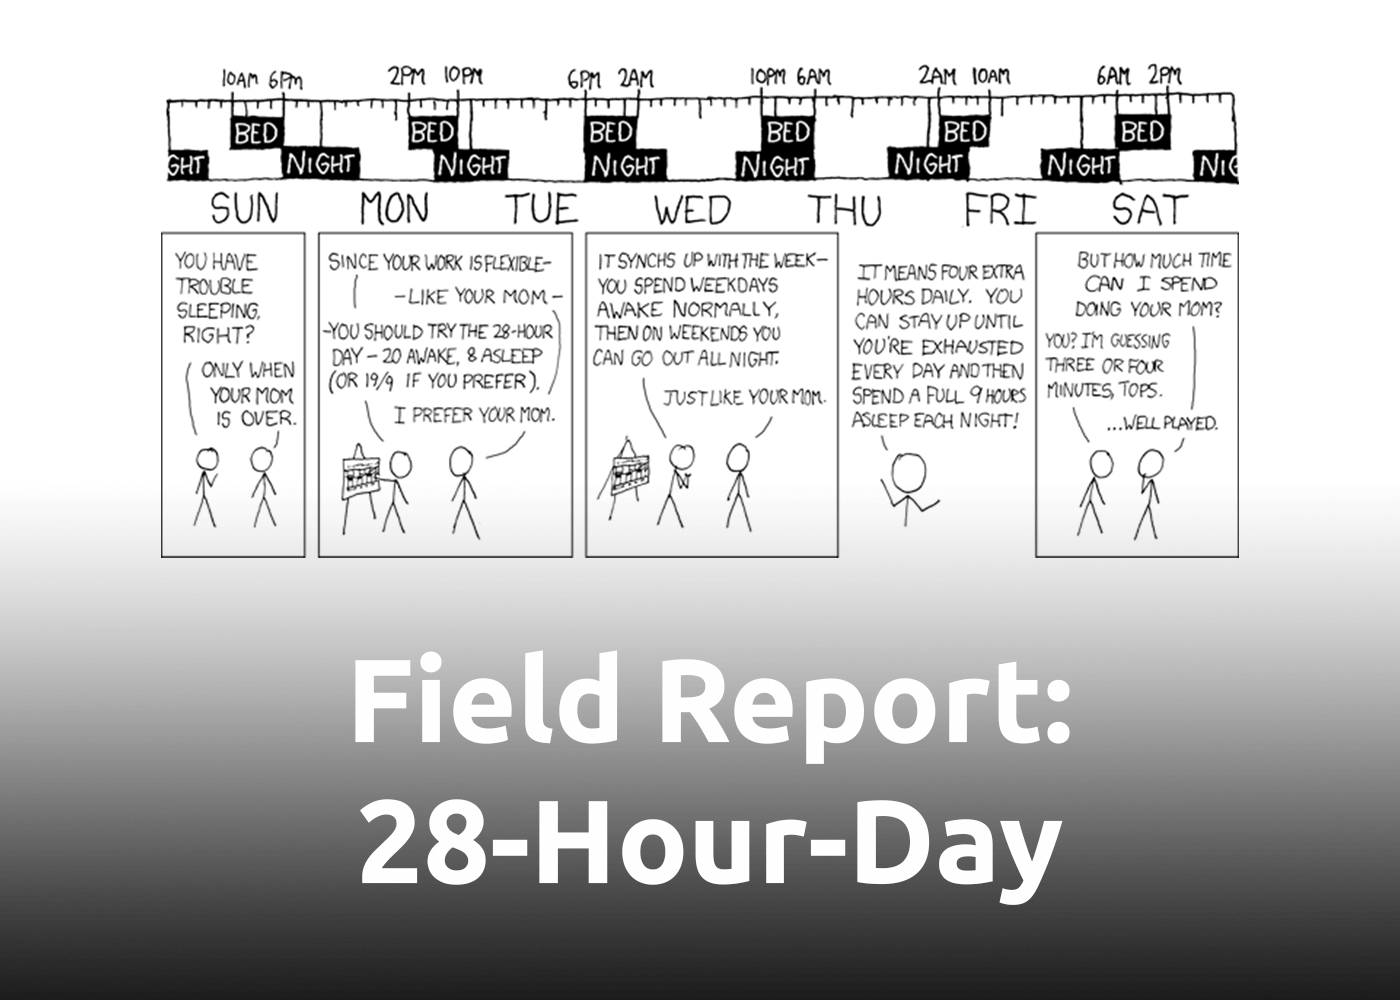 Field Report: Testing the 28-Hour Day Sleep Schedule for One Week